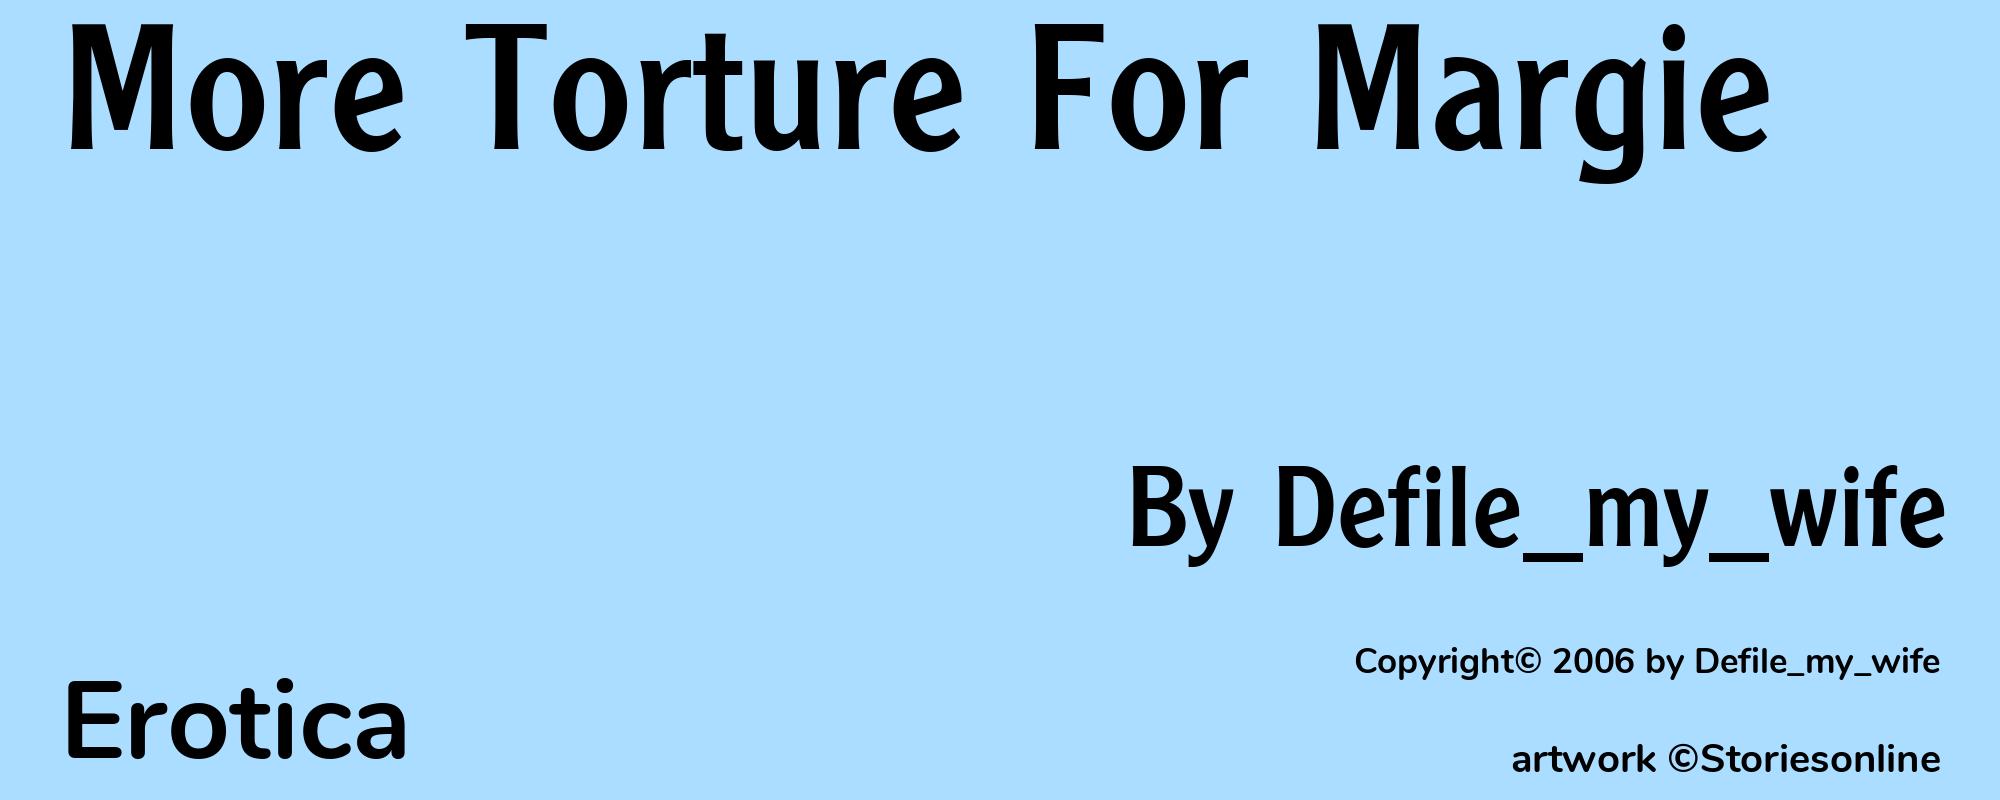 More Torture For Margie - Cover